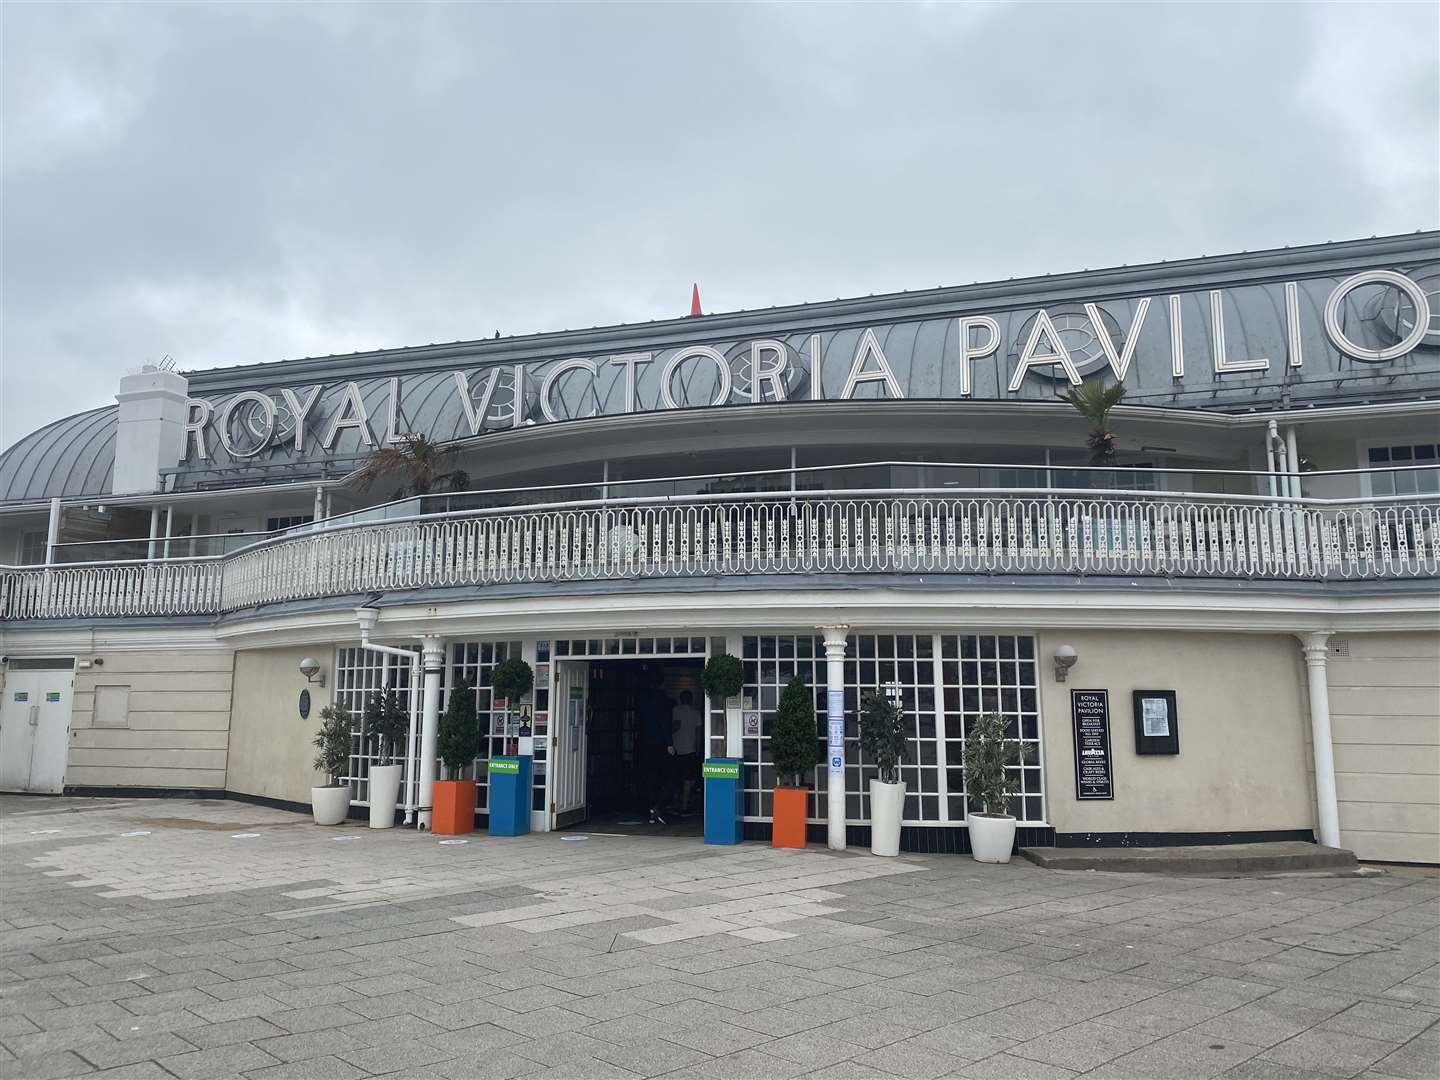 Royal Victoria Pavilion, Ramsgate's Wetherspoons, welcomed back customers today for the first during the Covid-19 pandemic